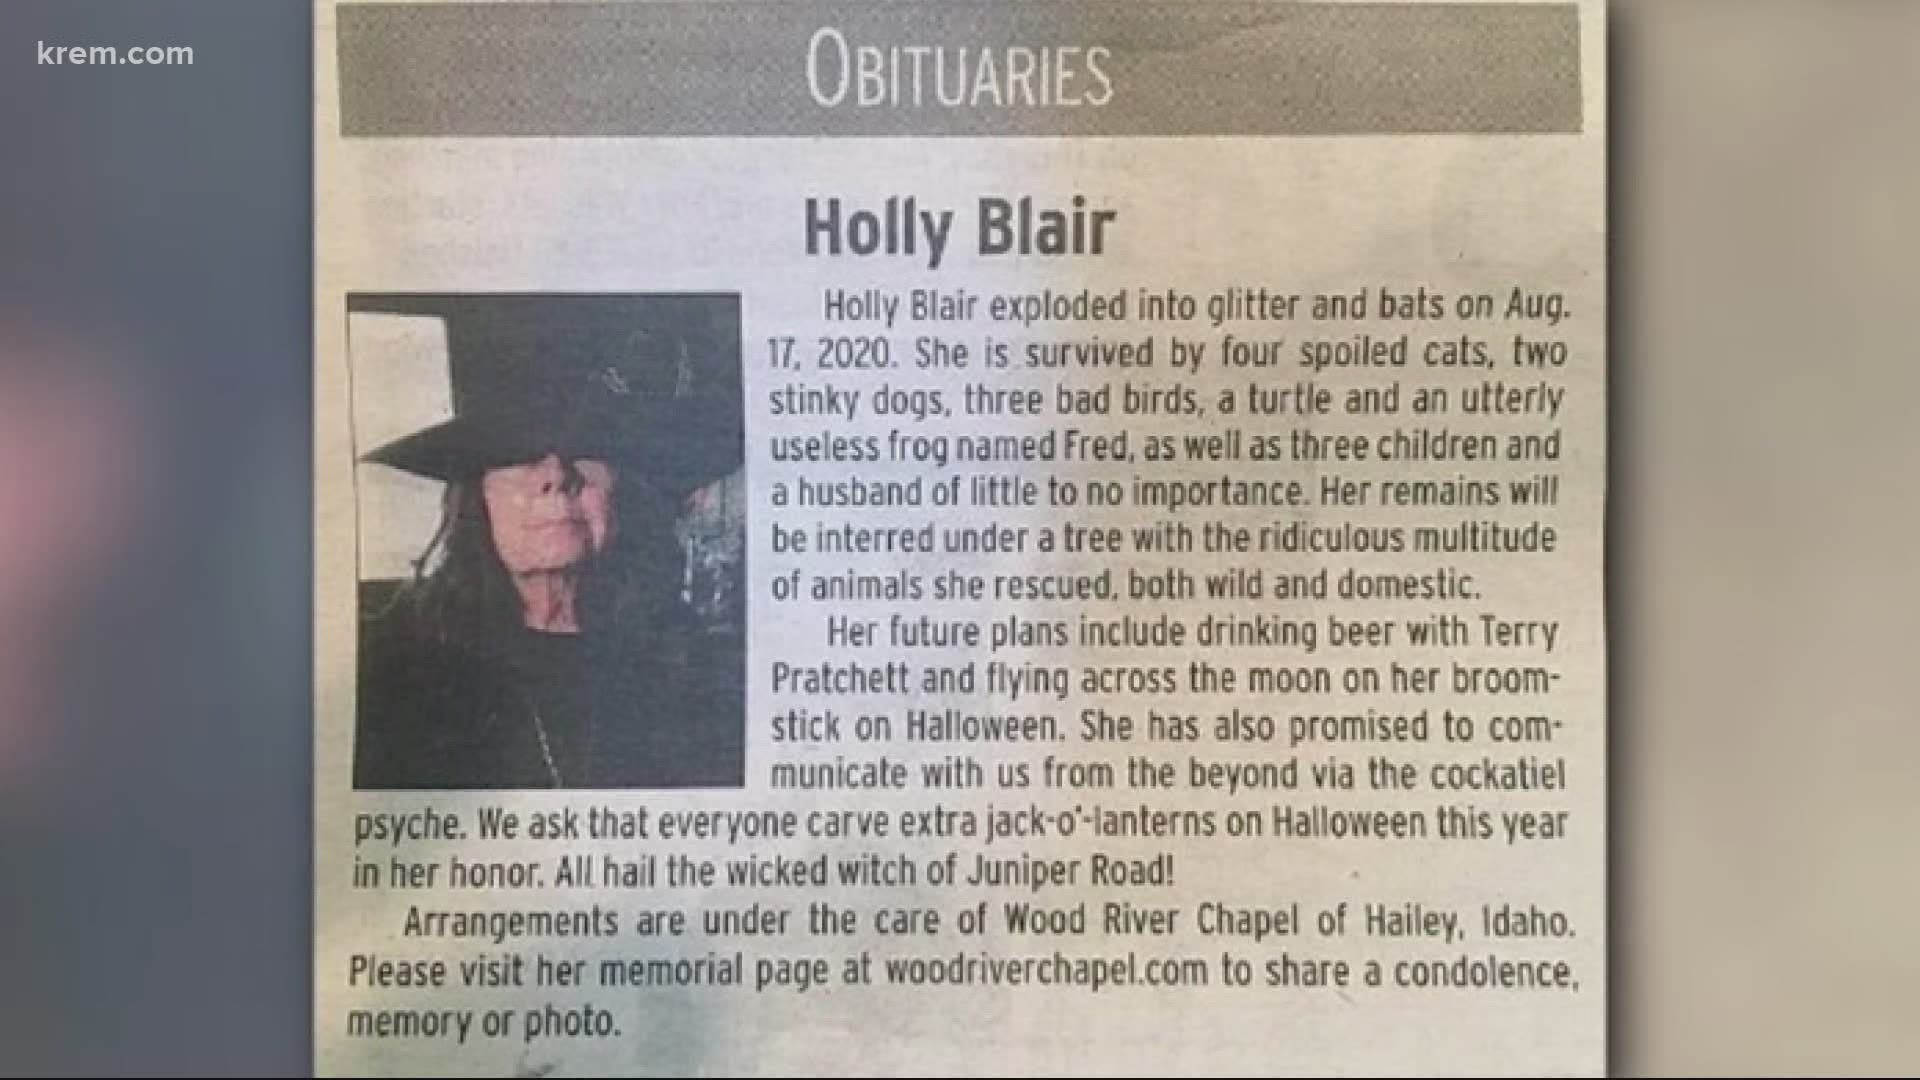 Blair leaves behind "four spoiled cats, two stinky dogs, three bad birds, a turtle, and an utterly useless frog named Fred," the obituary reads.